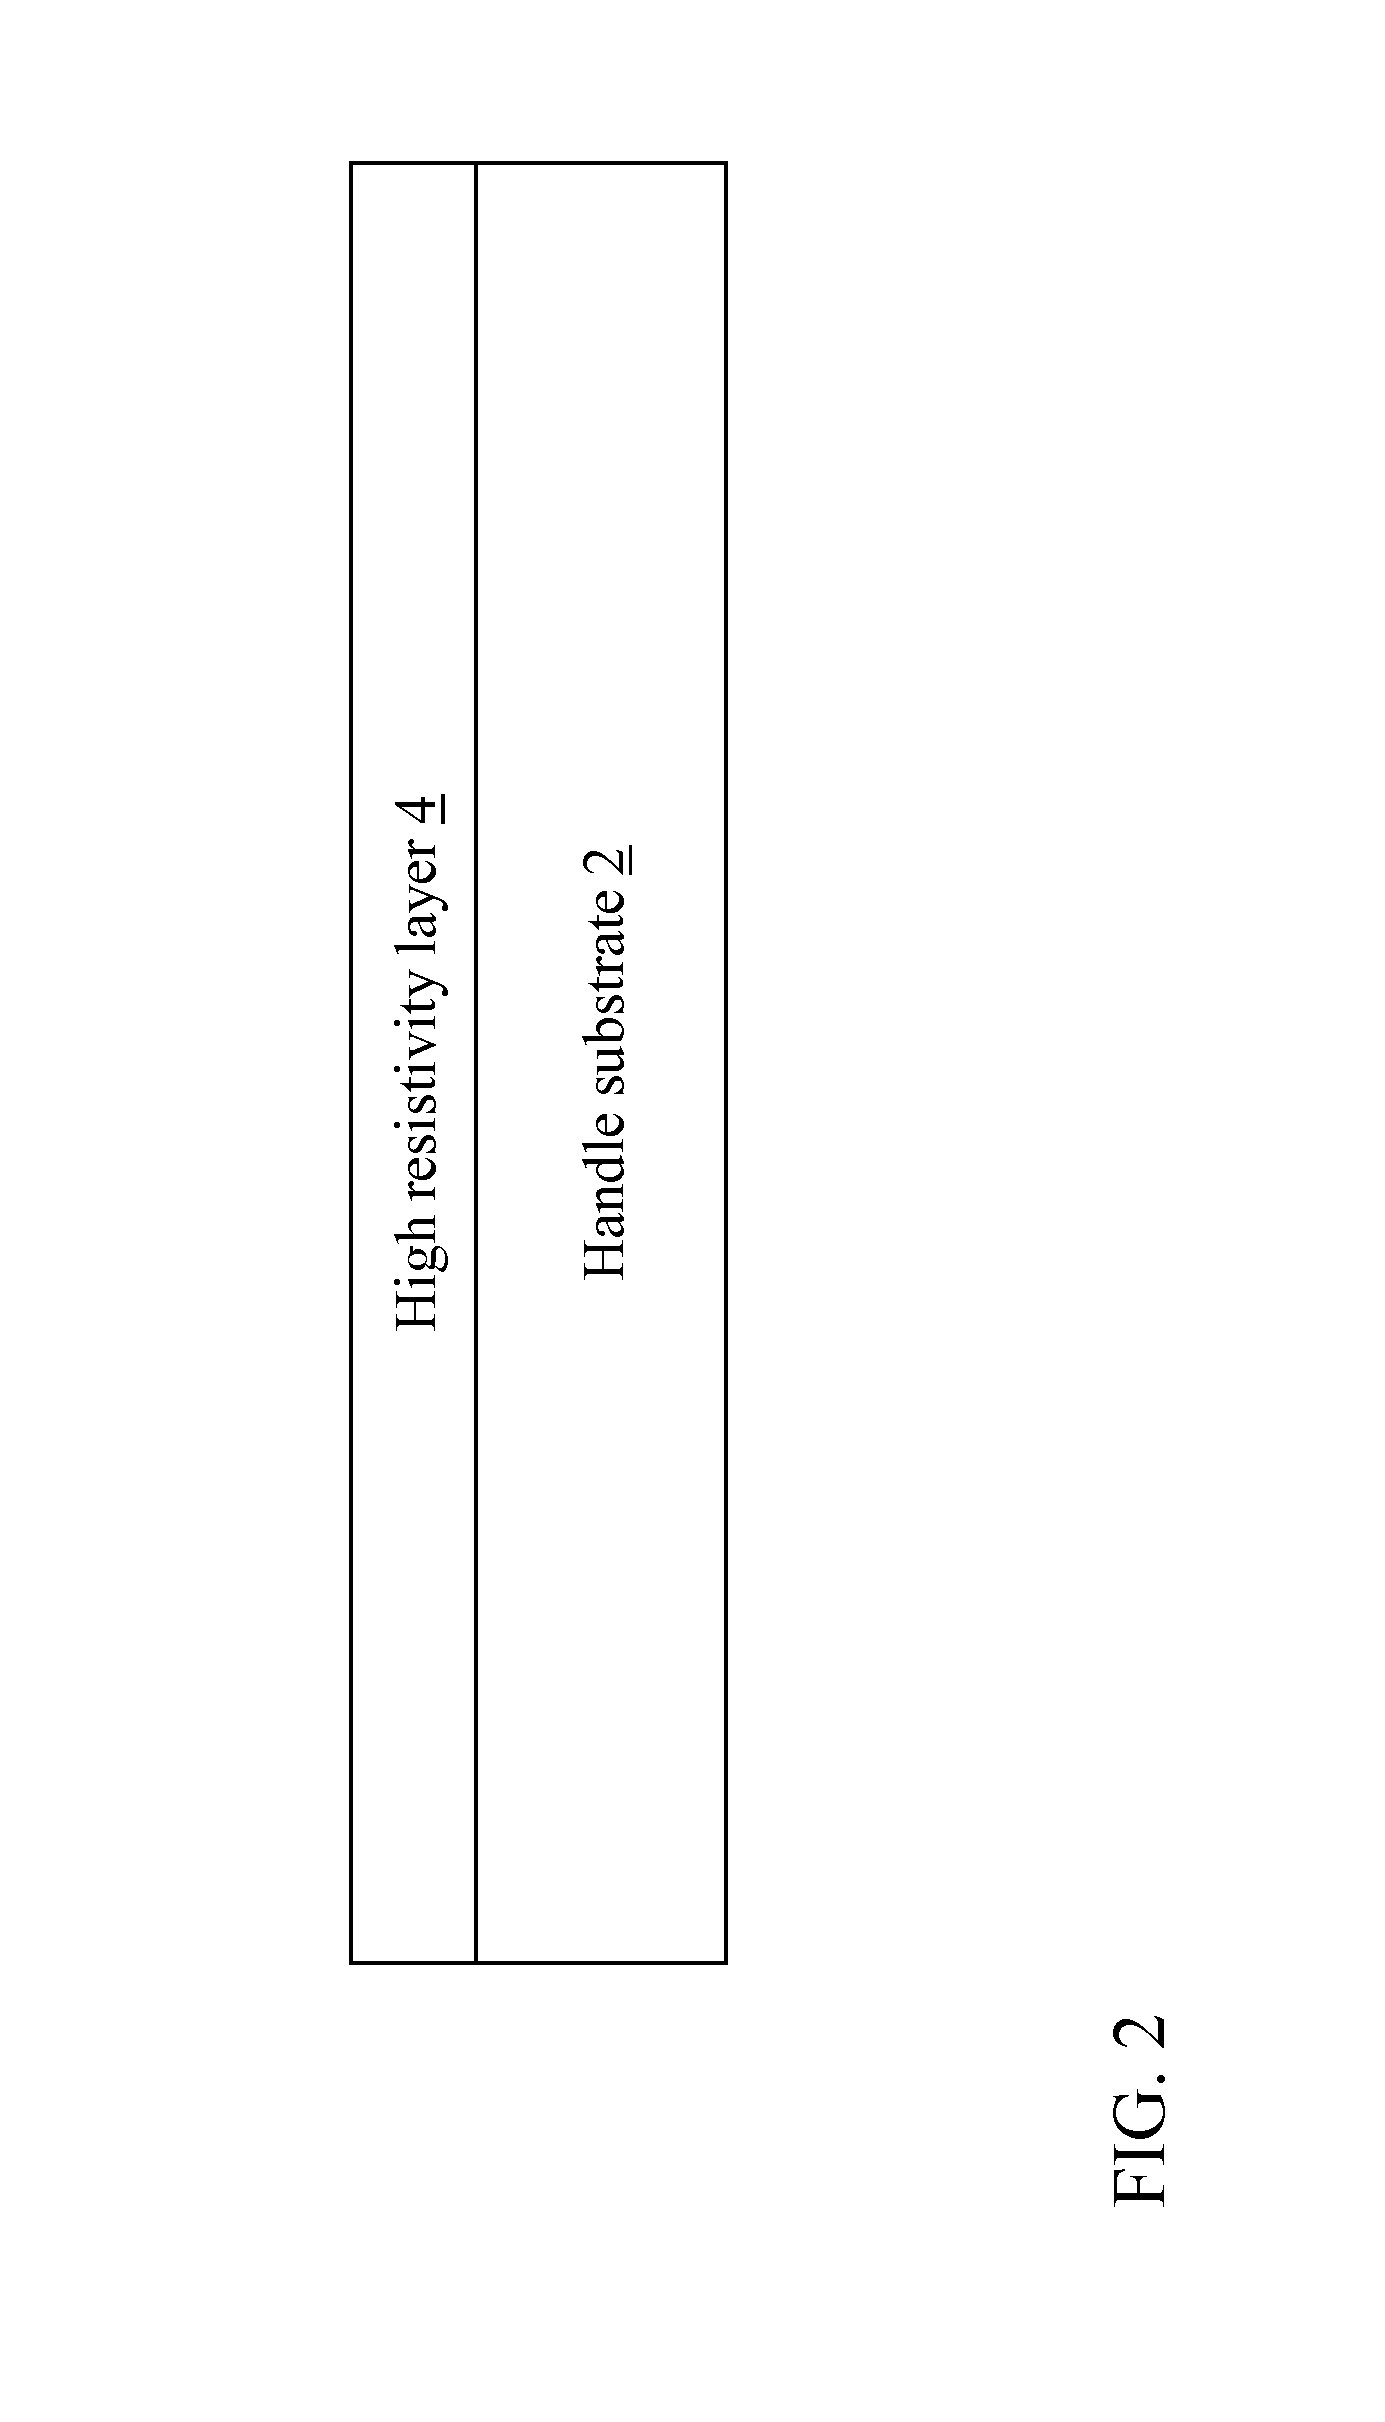 High resistivity silicon-on-insulator substrate and method of forming